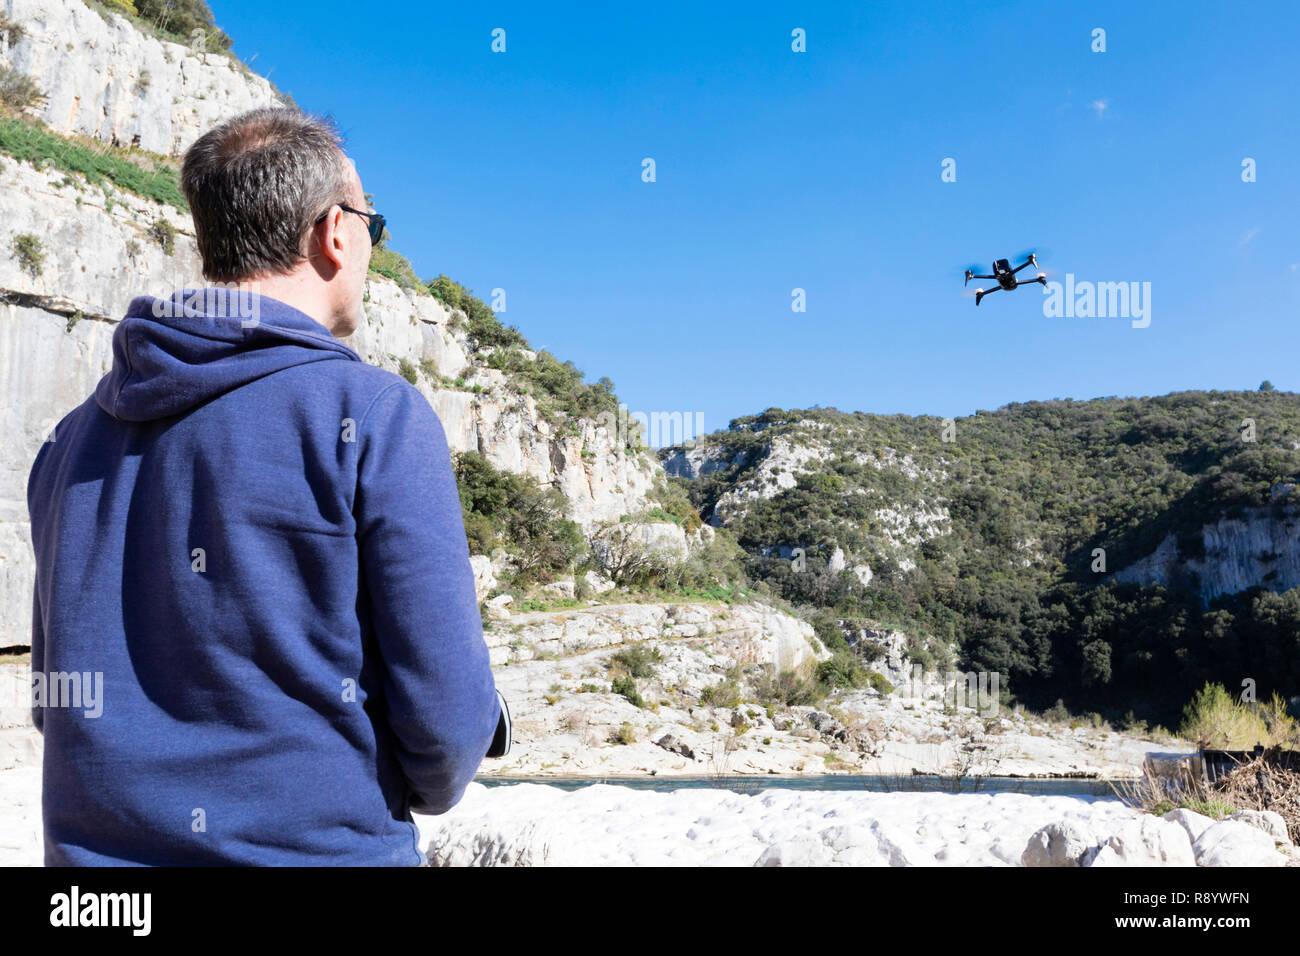 Sanilhac-Sagries (south-eastern France): UAV pilot flying a drone on the site of La Baume, in the Gardon gorges. Stock Photo